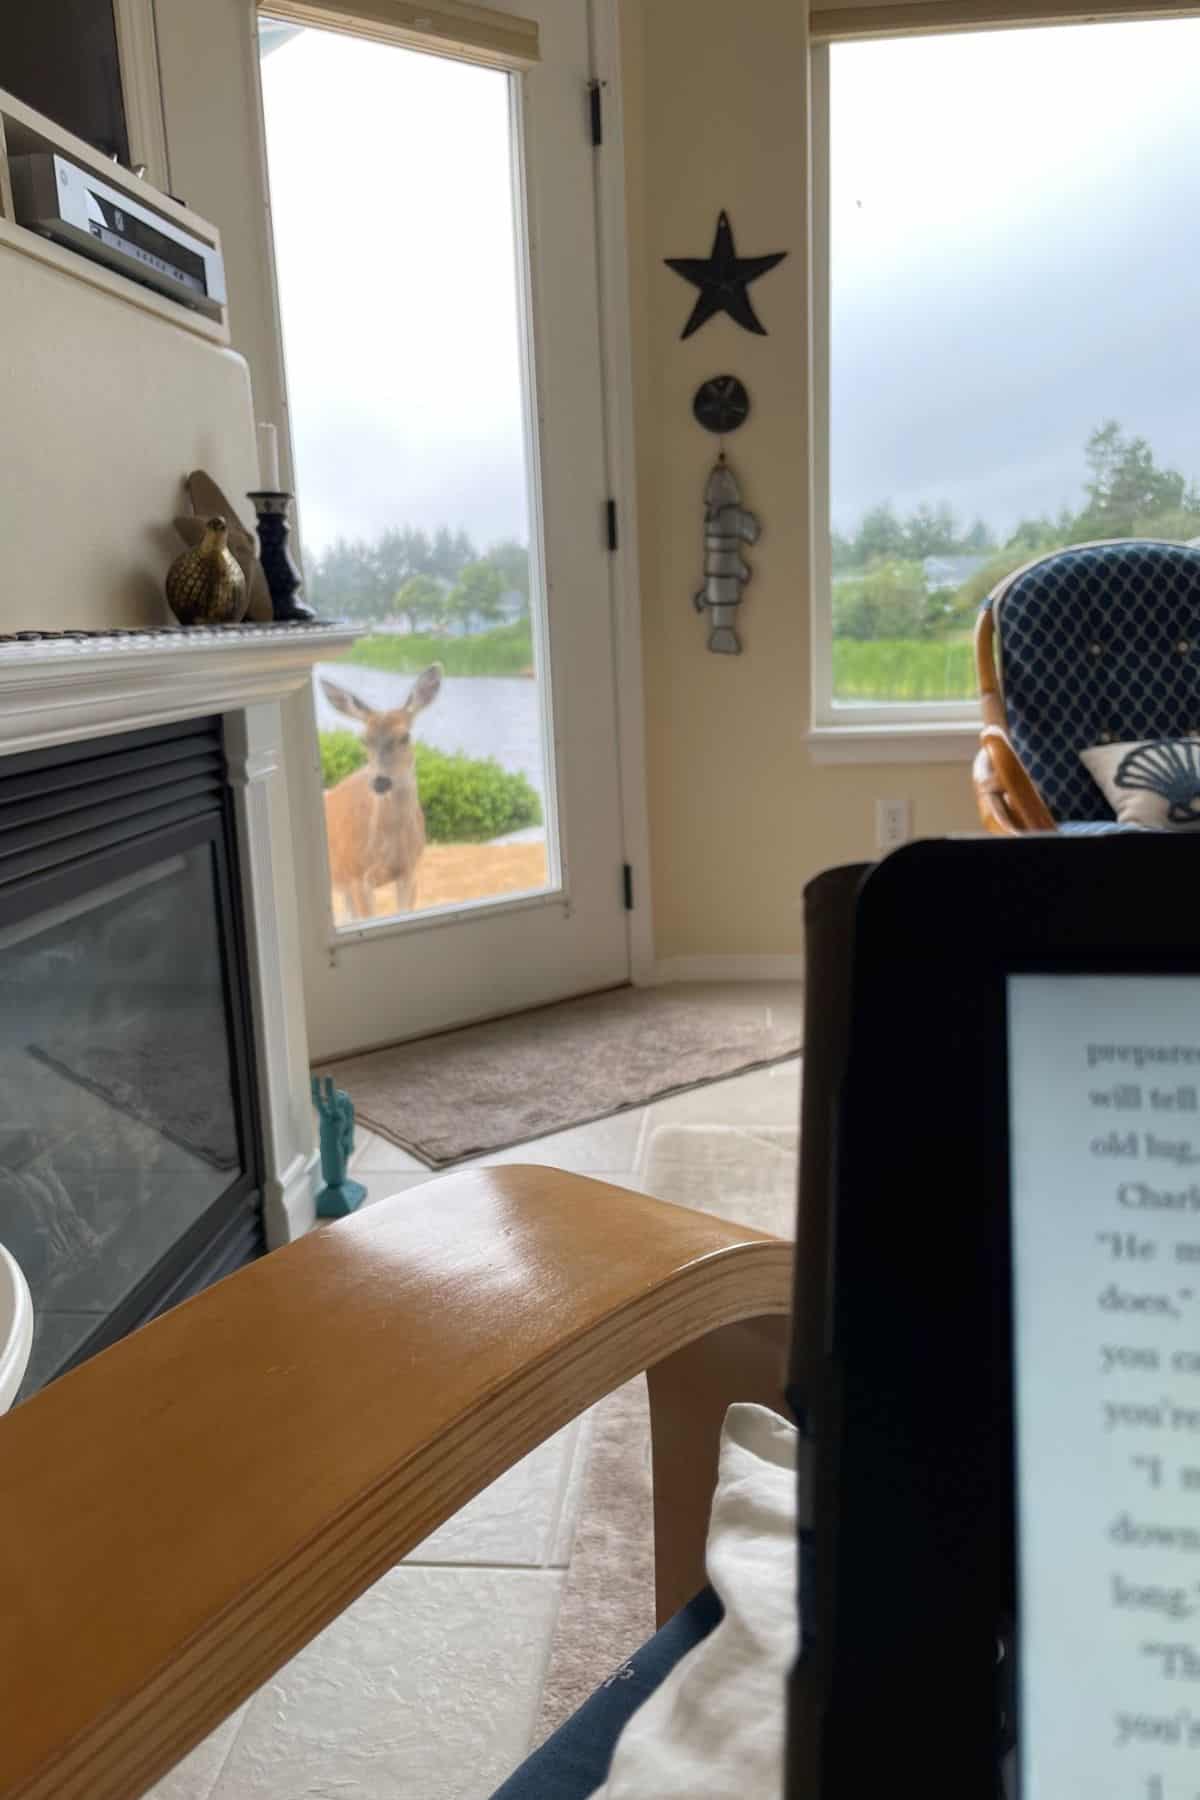 a deer looking through a window while someone reads a book from a Kindle.